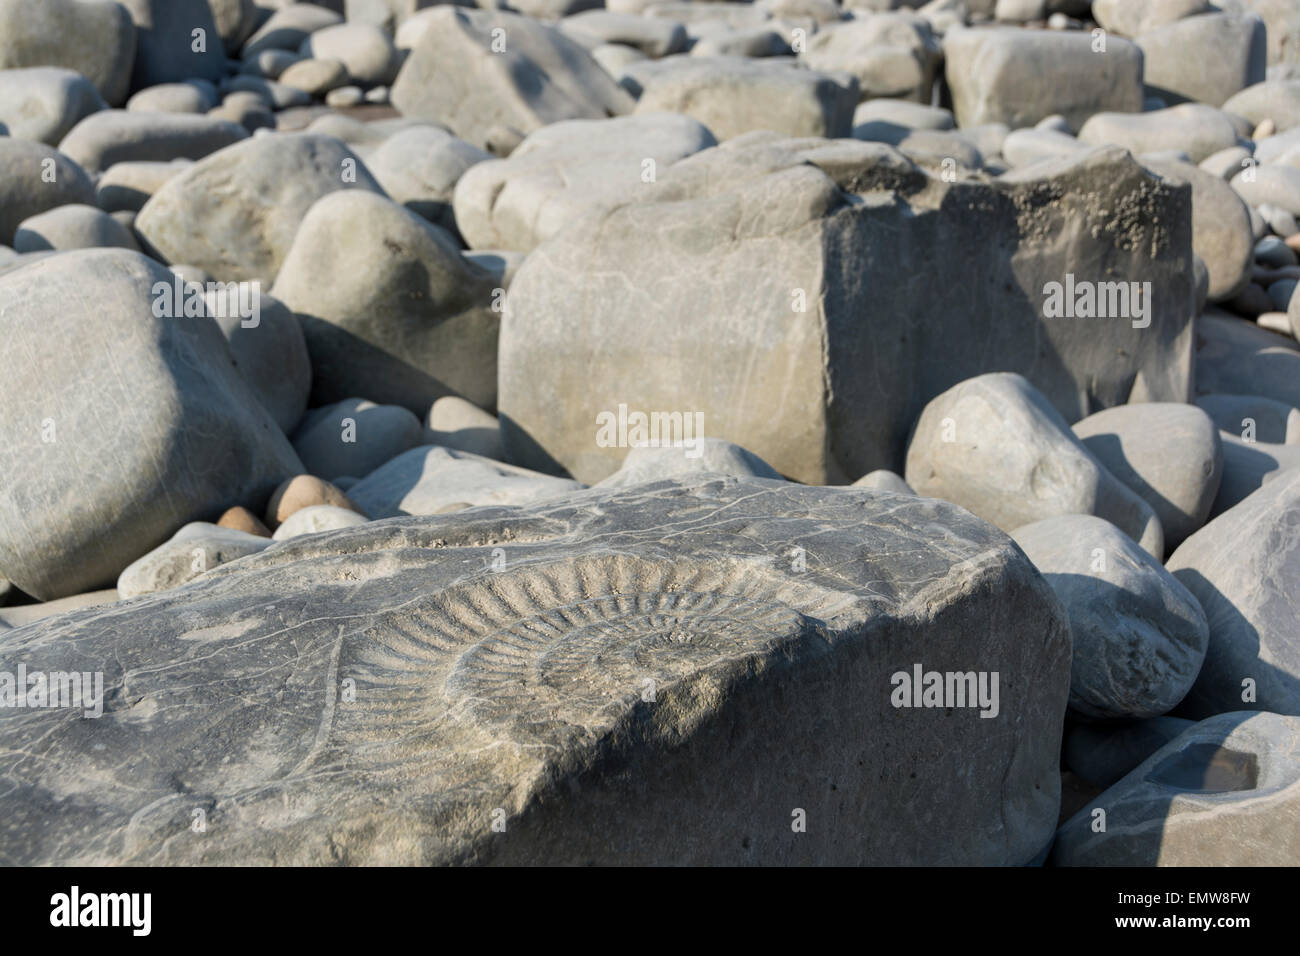 A large amonite fossil in sedimentary rocks on the beach and in the cliffs at Kilve in Somerset, England, UK Stock Photo